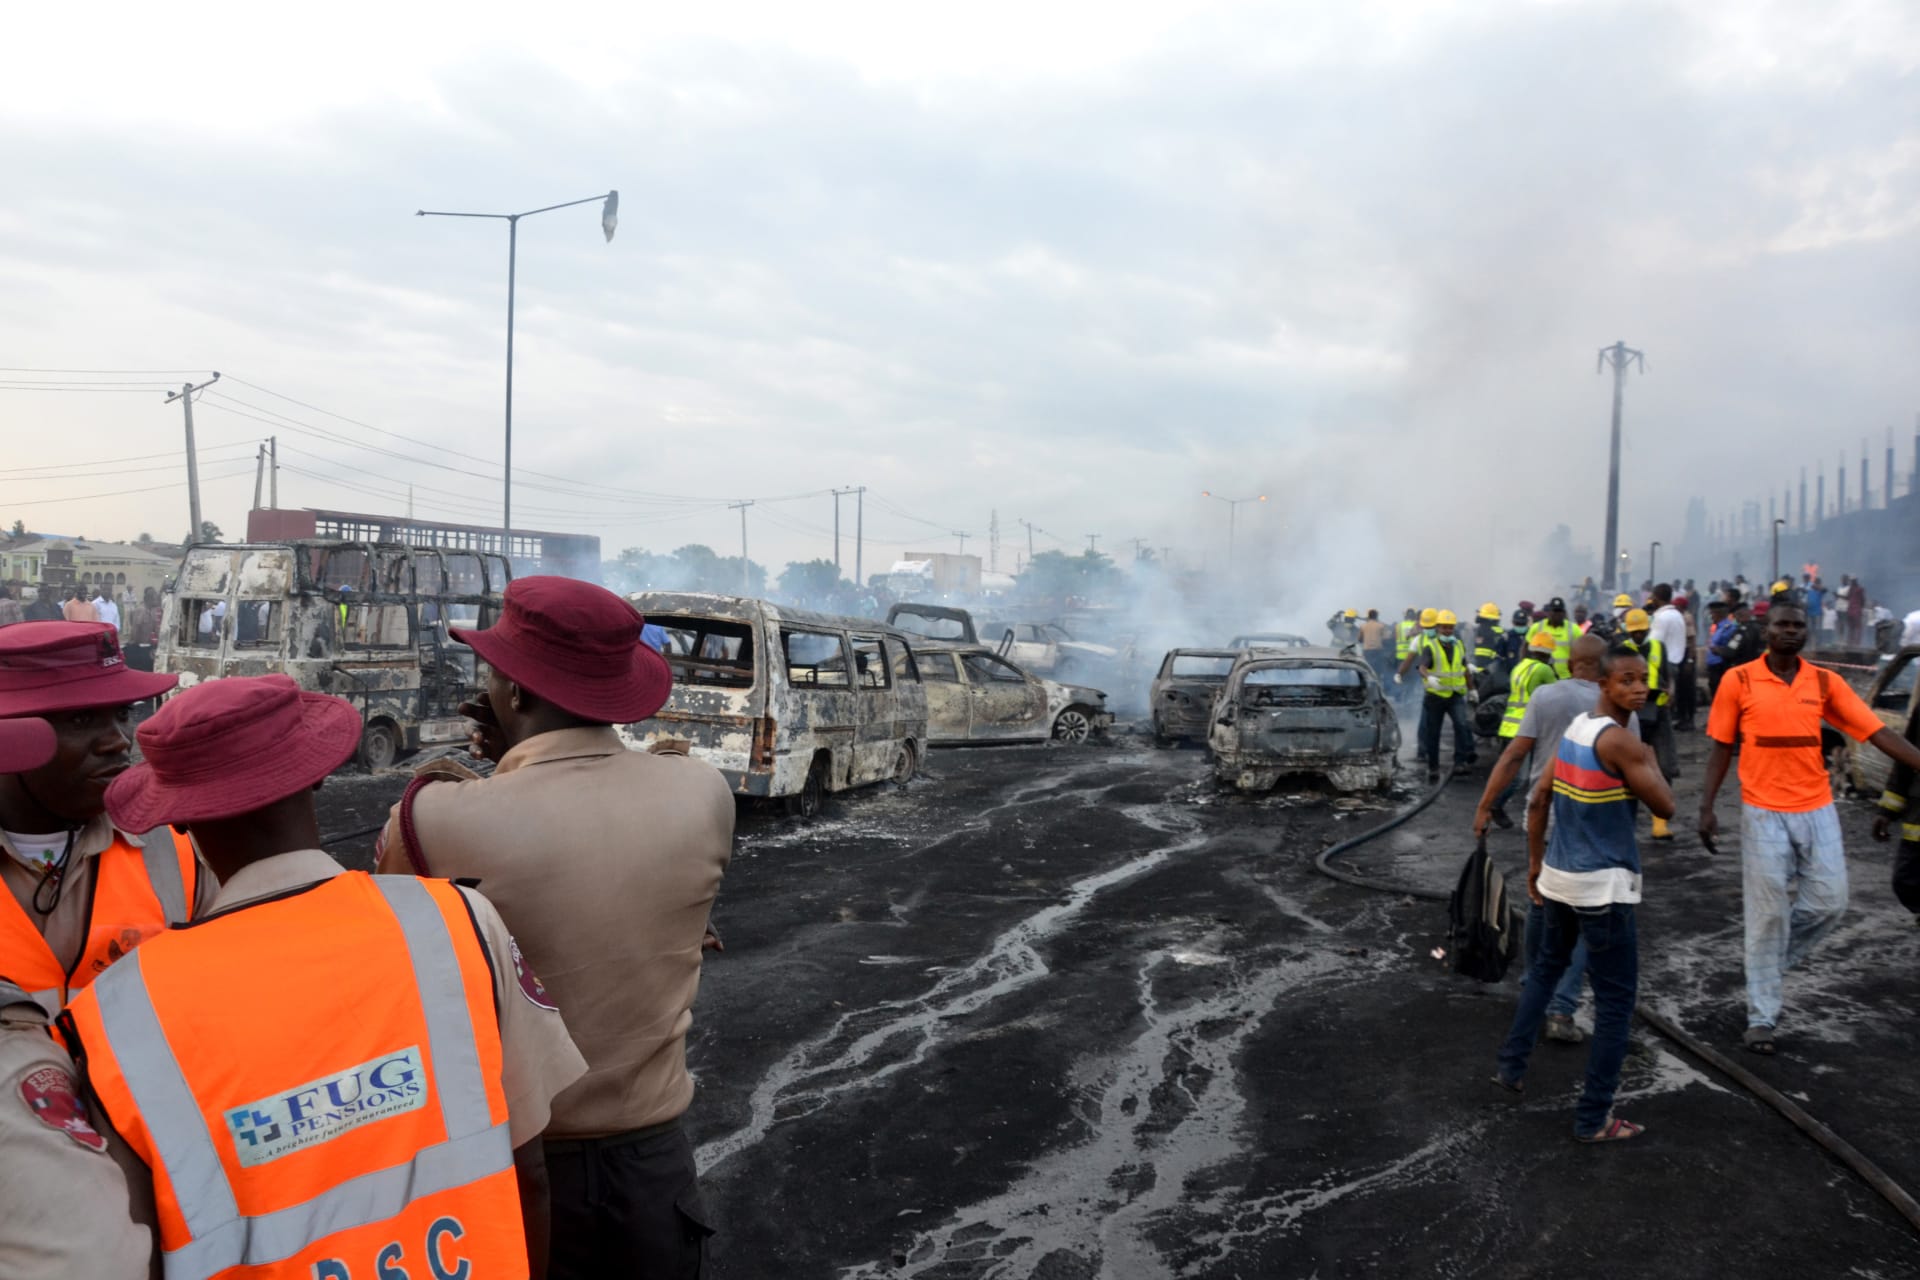 scene of an oil tanker explosion on a highway on June 28, 2018 in Lagos